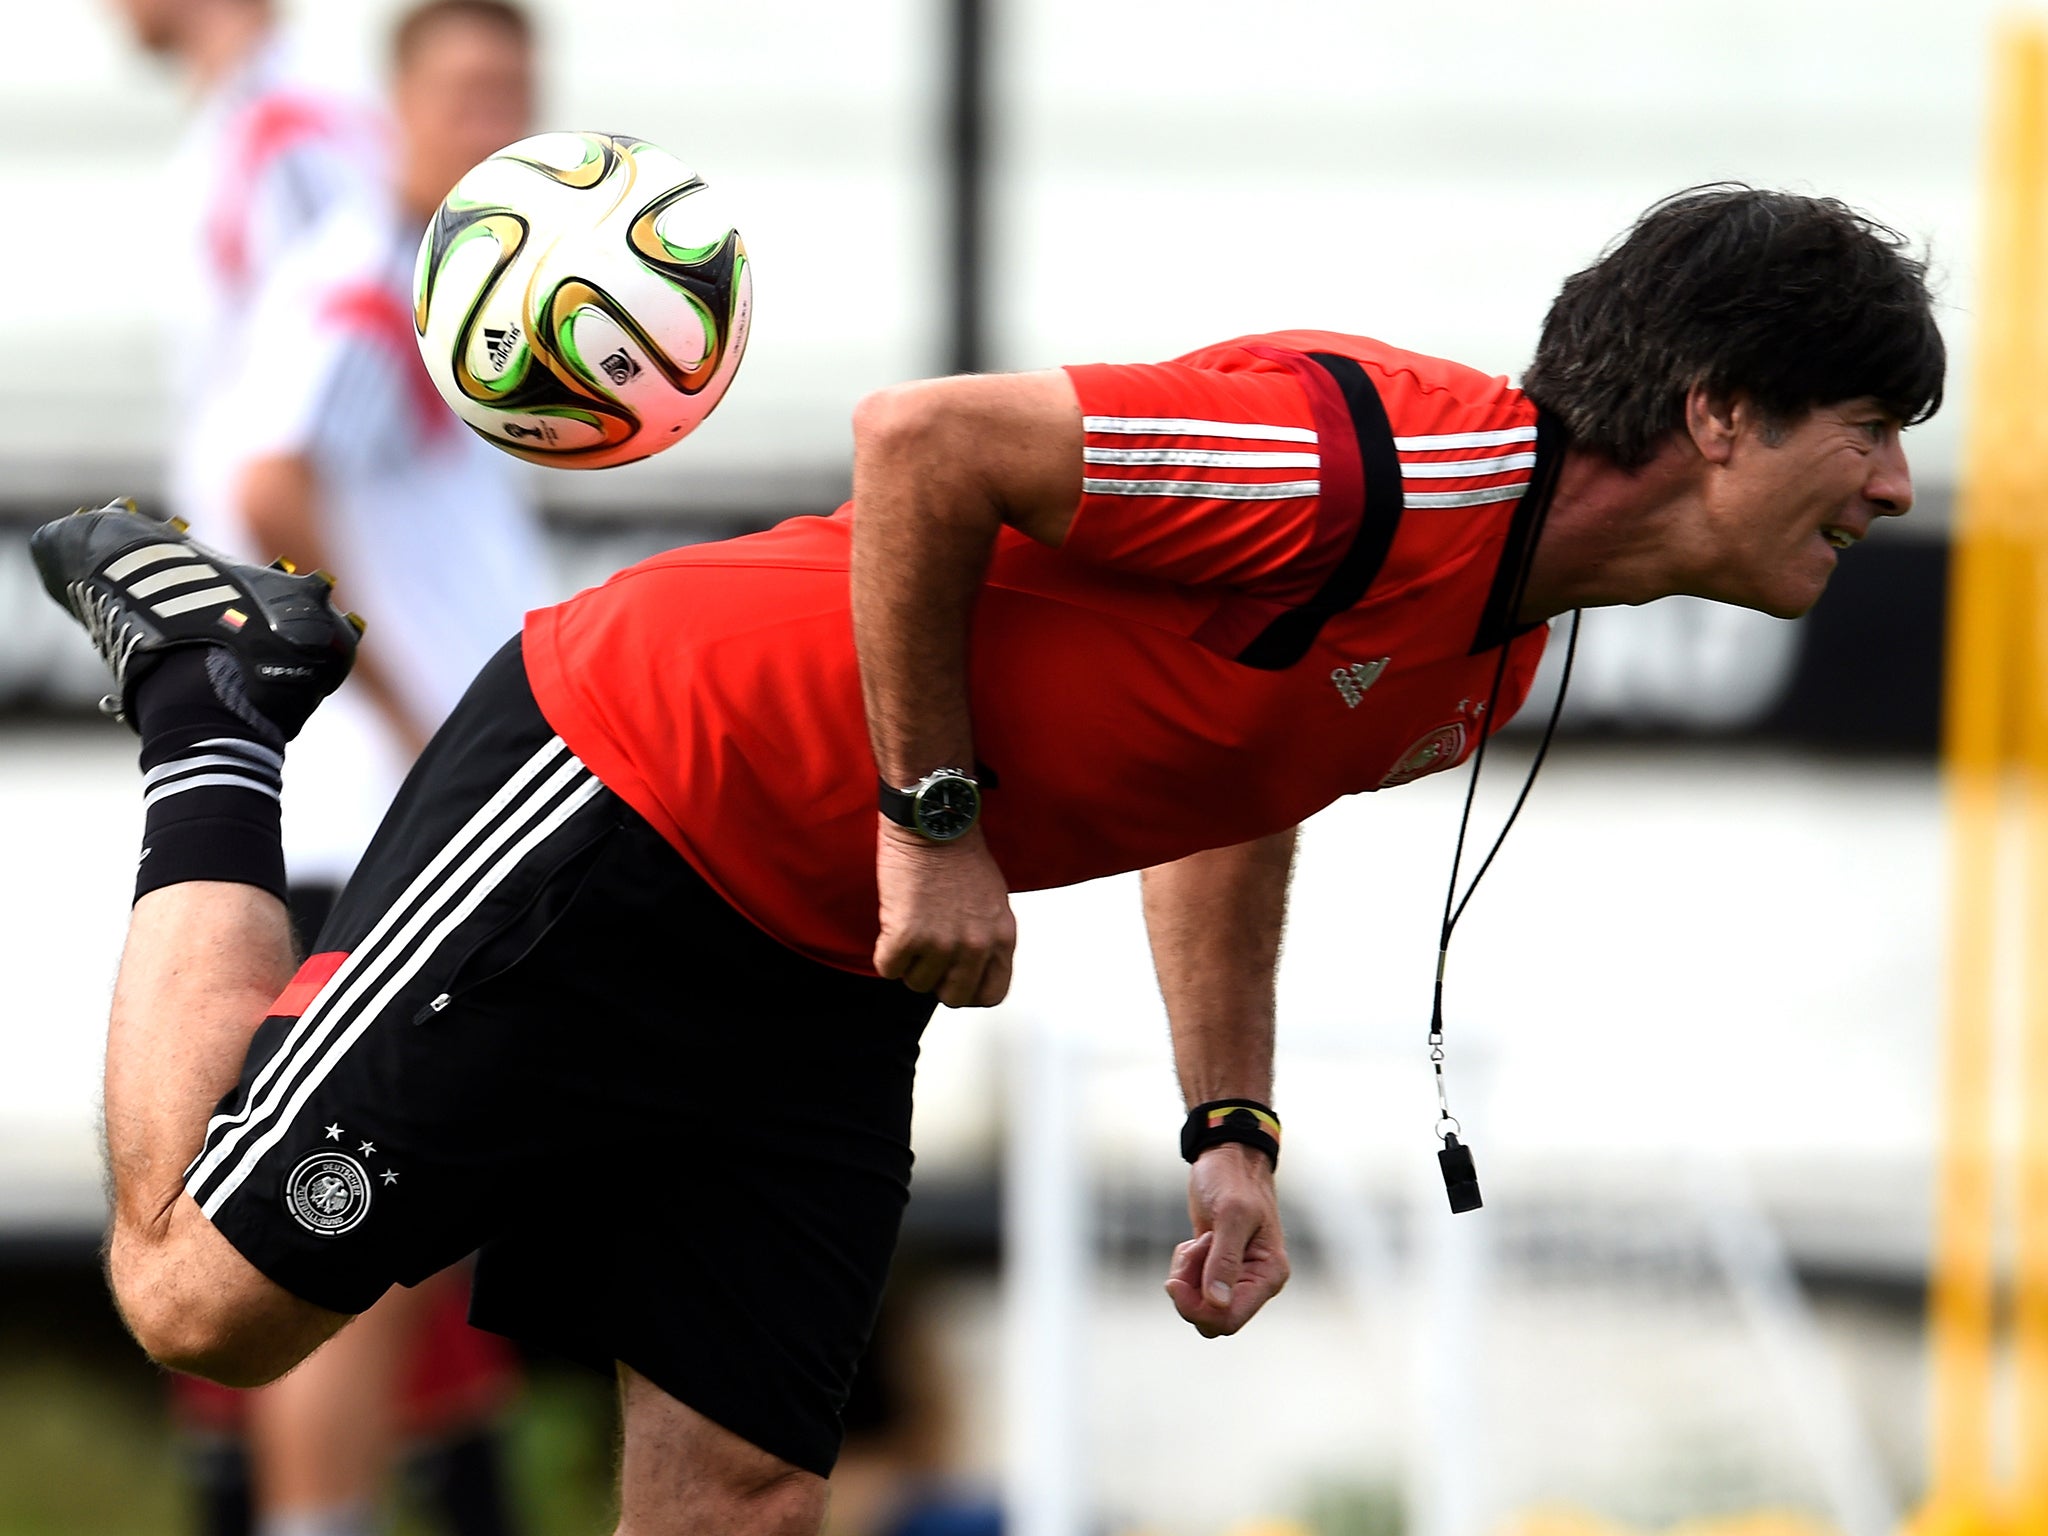 Joachim Löw trains with his Germany squad ahead of the World Cup final